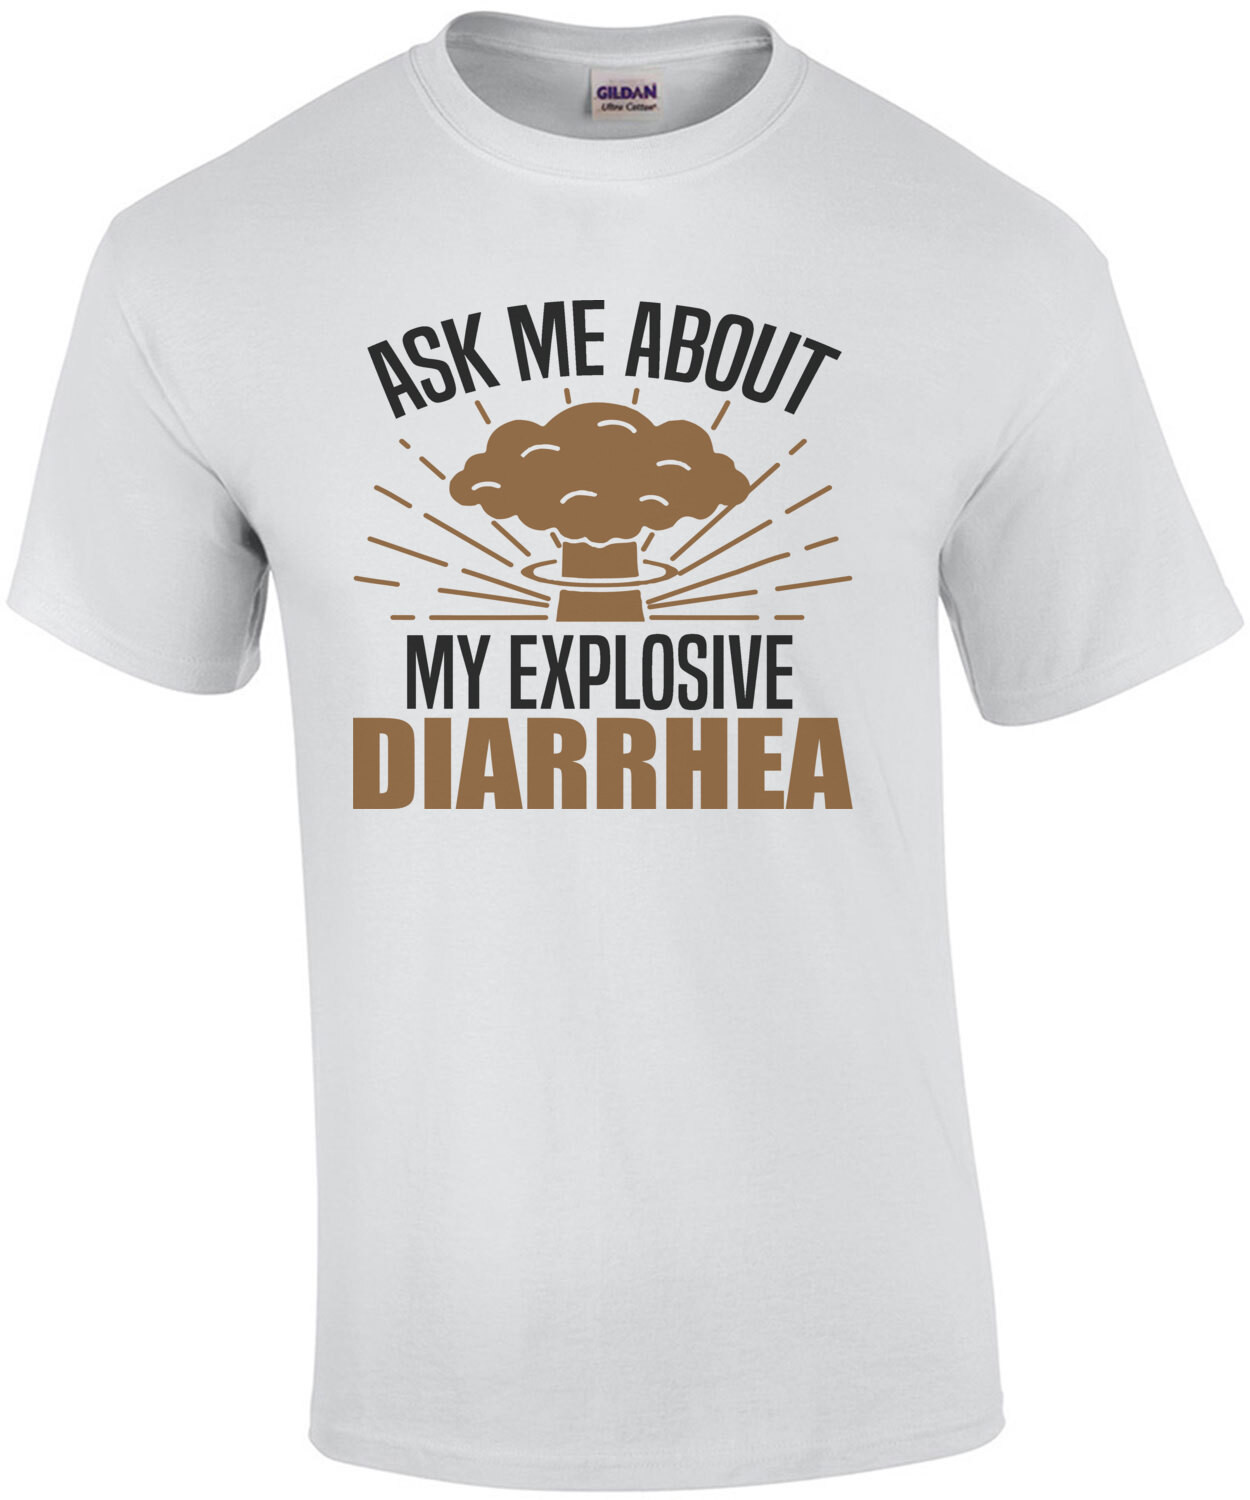 Ask me about my explosive diarrhea - funny t-shirt